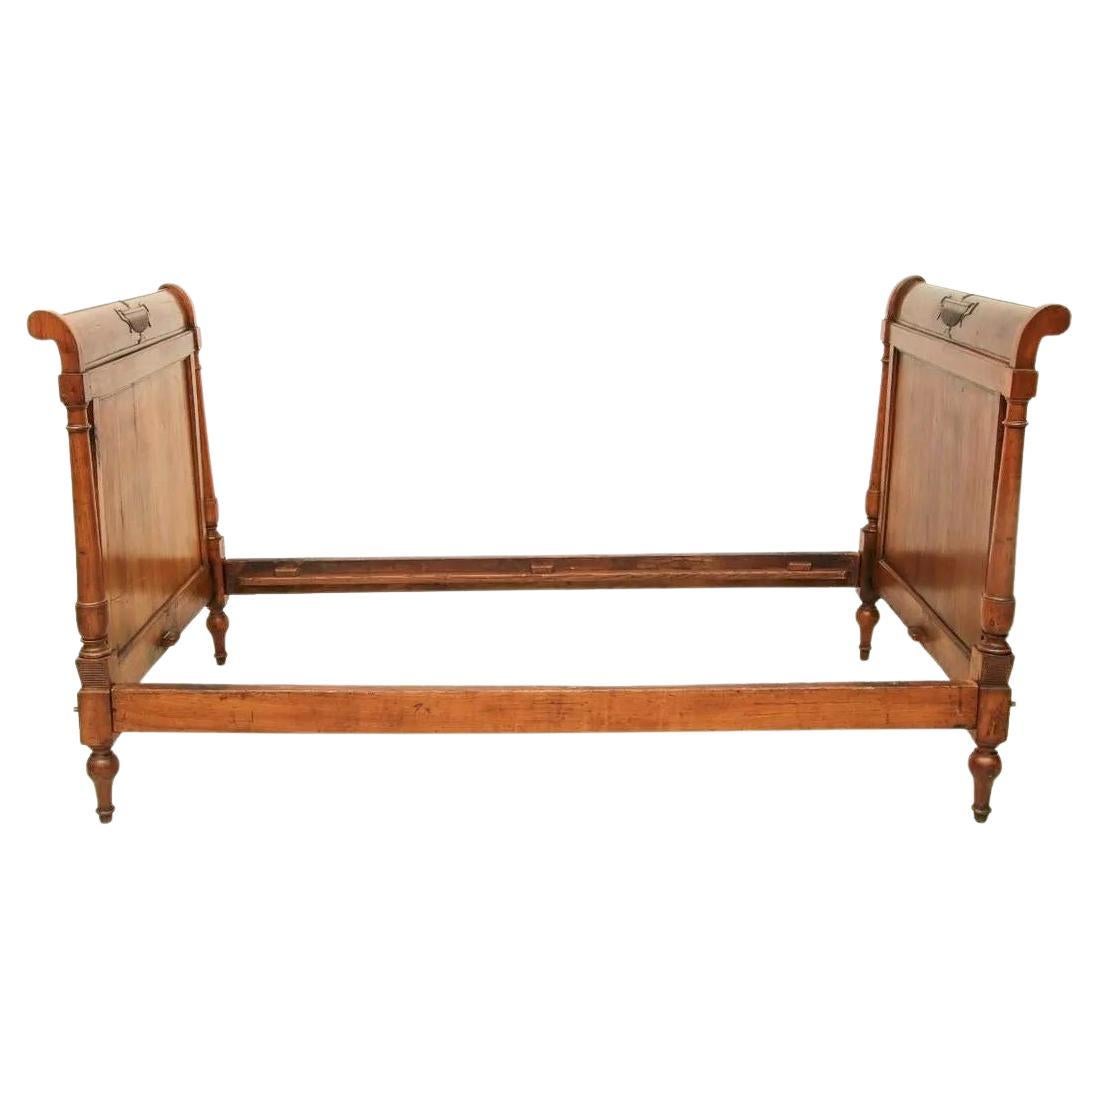 French Directoire Period Daybed, Circa 1800